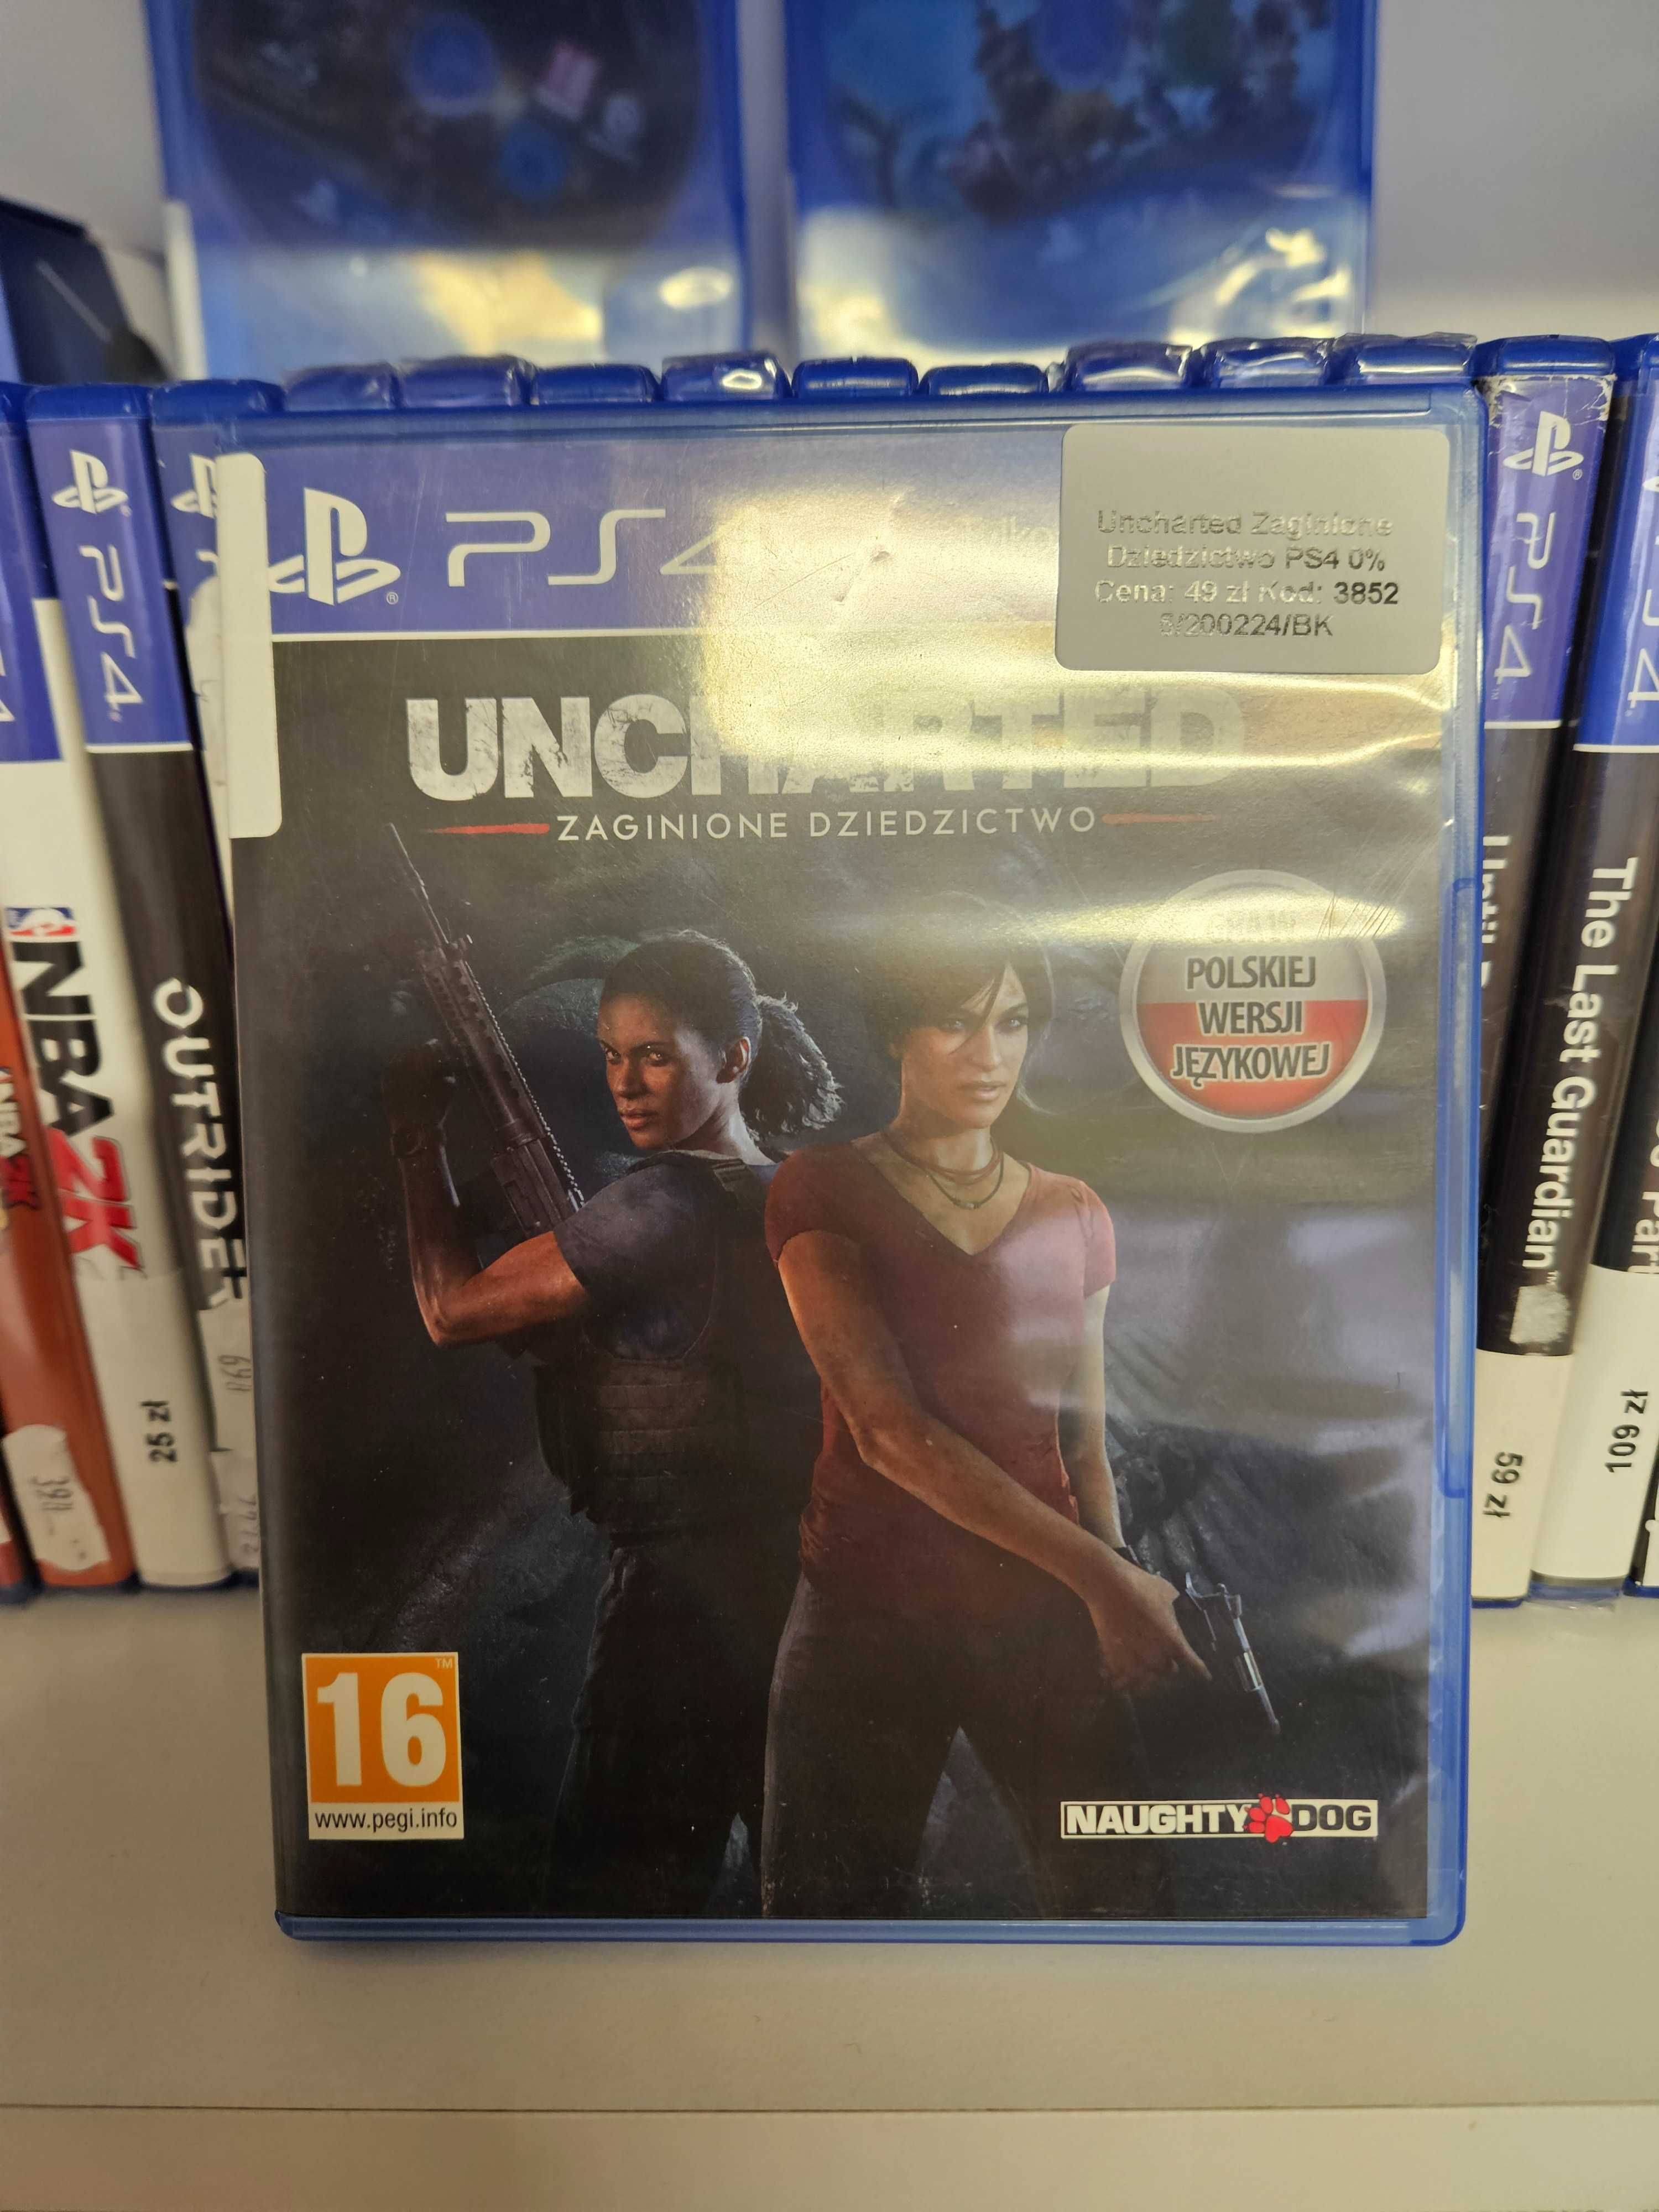 Uncharted Zaginione Dziedzictwo PS4 - As Game & GSM 3852